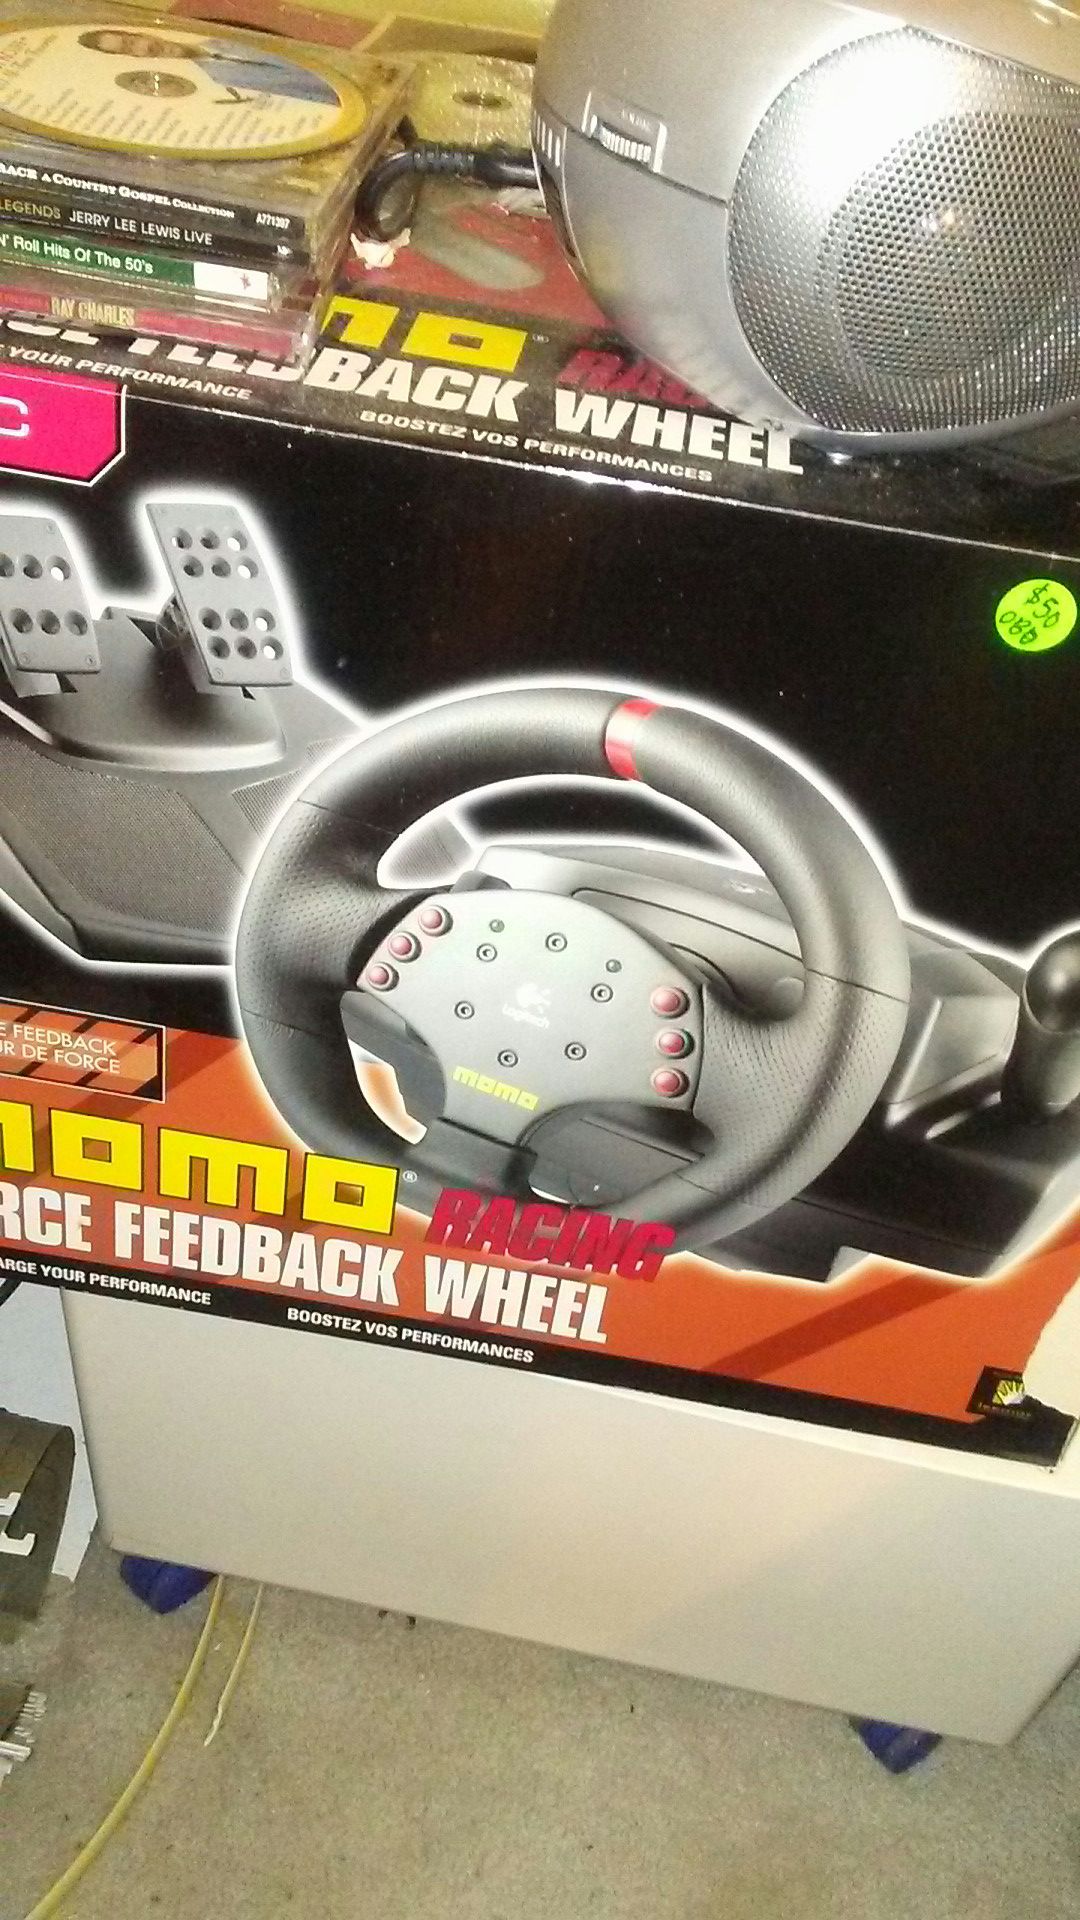 Steering wheel controller for your computer it's a game for kids {contact info removed} please call me